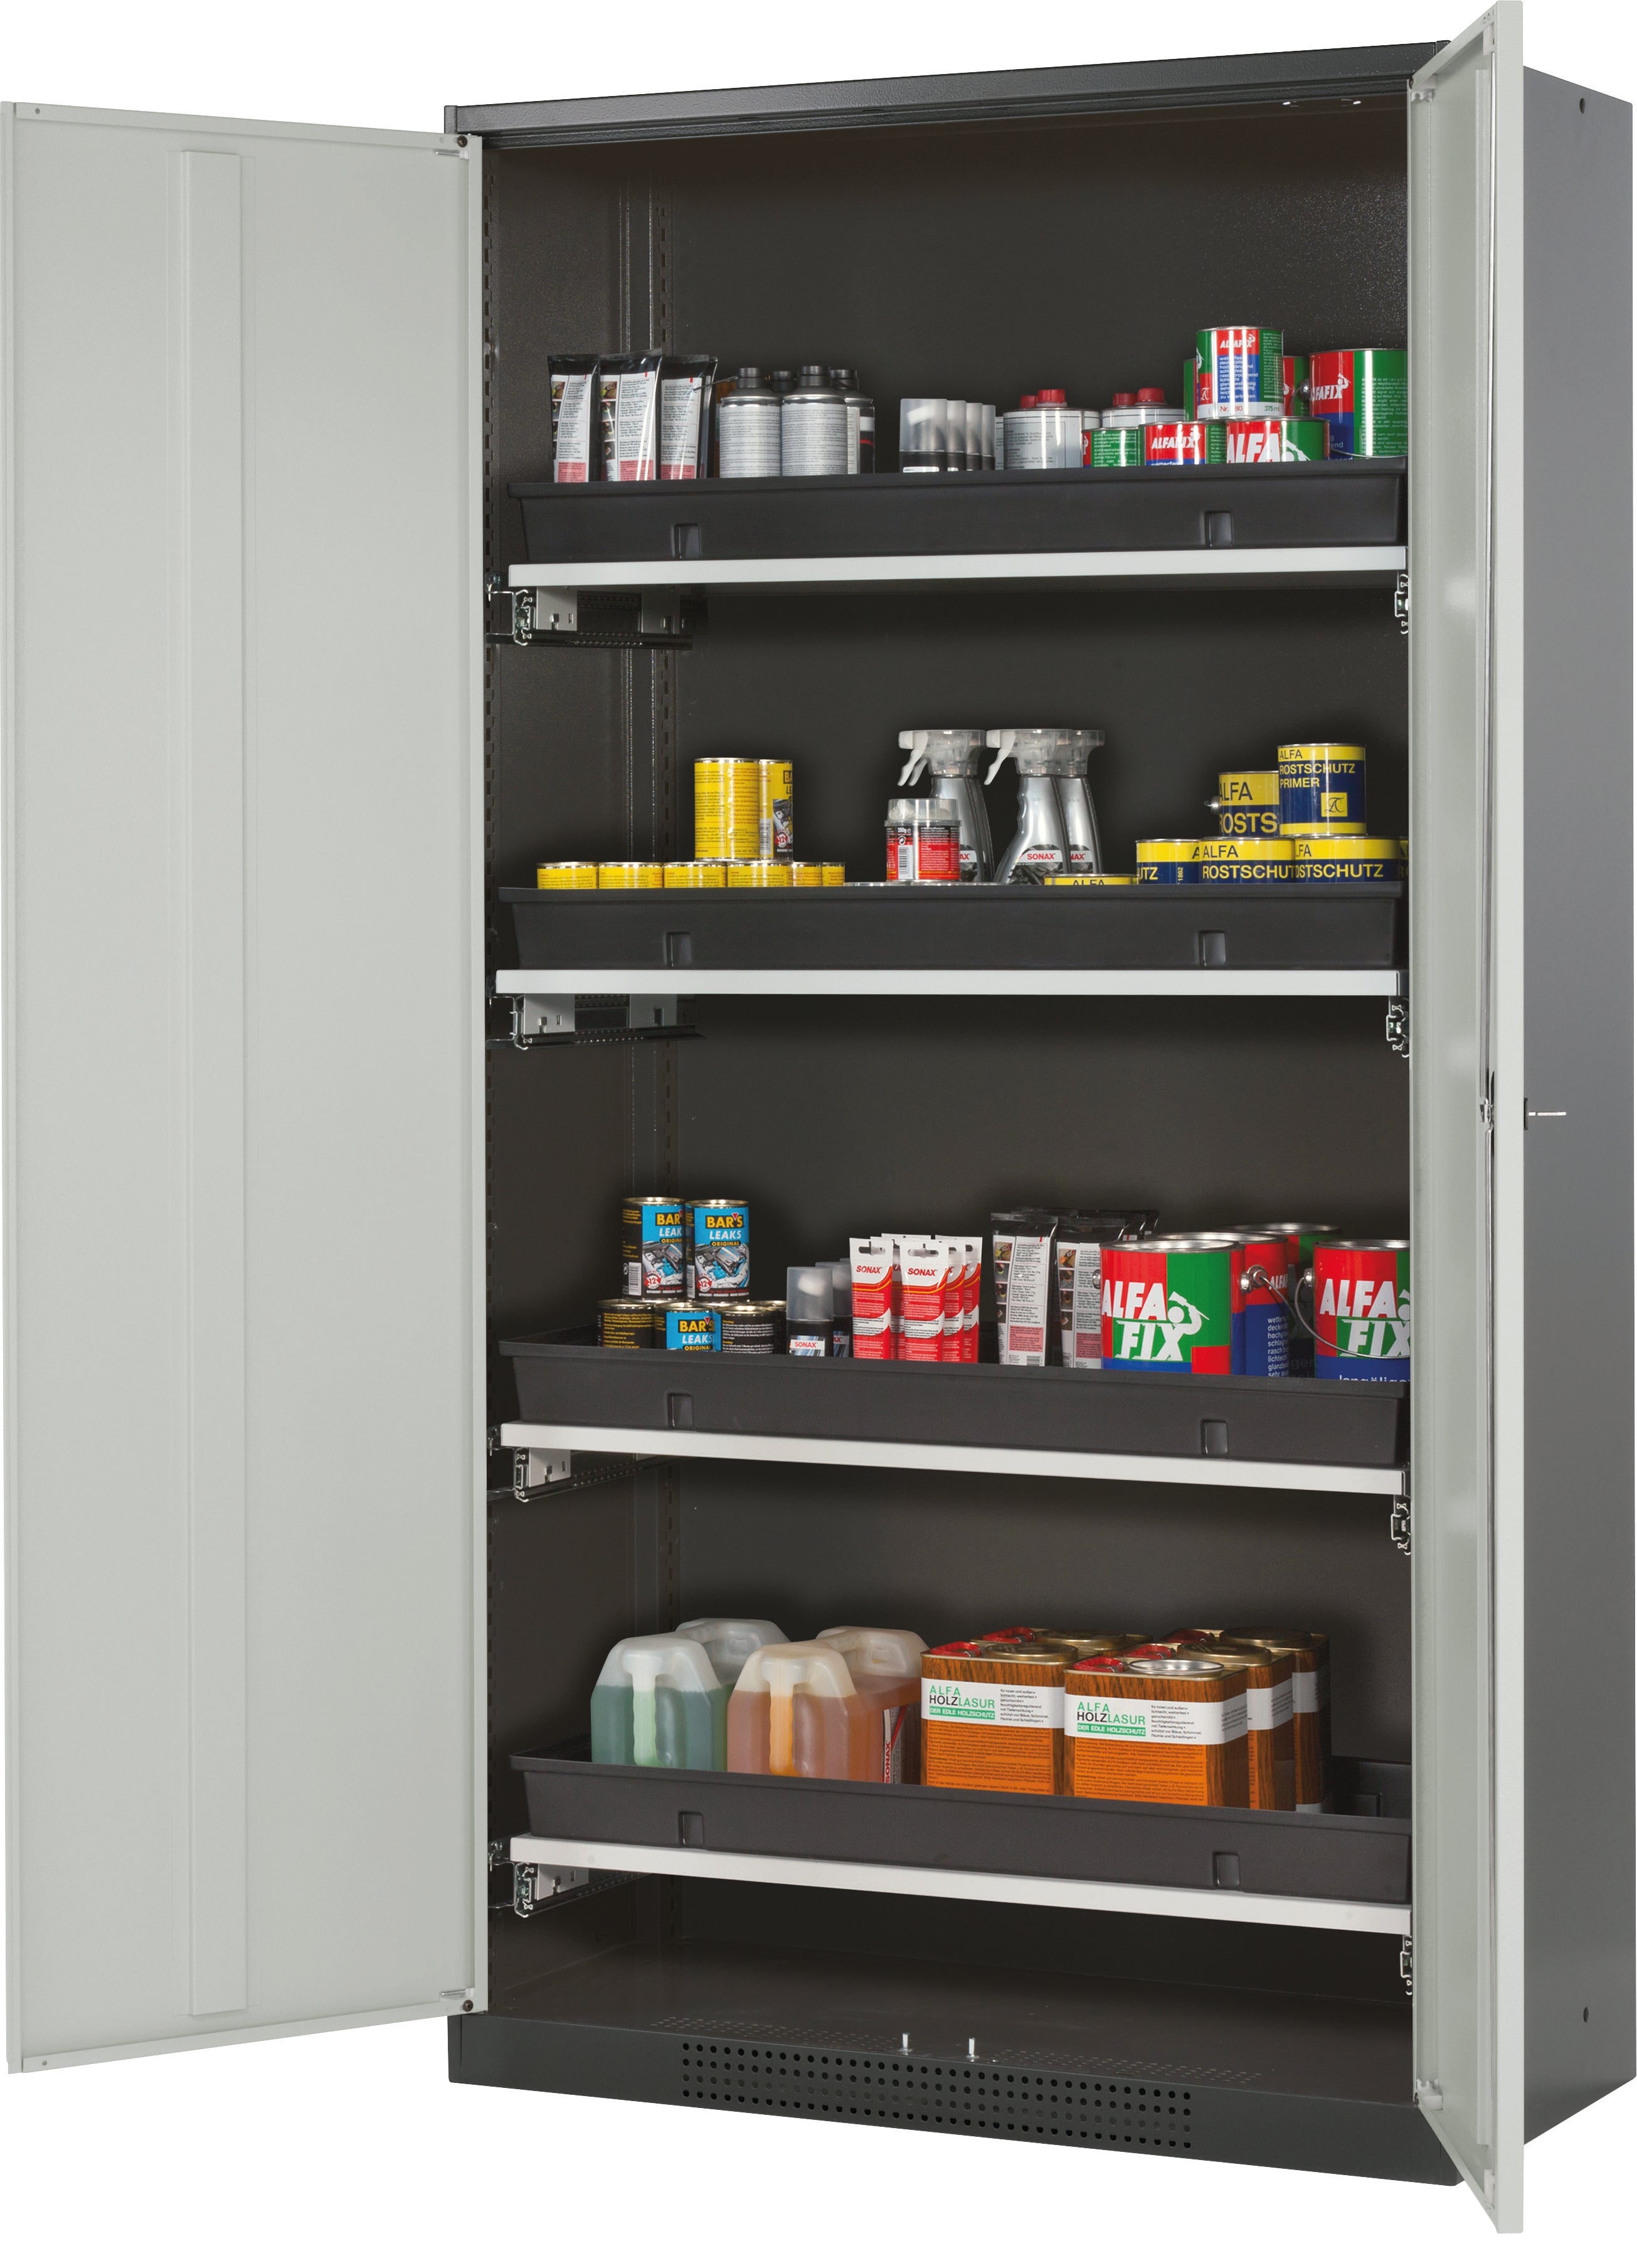 Chemical cabinet CS-CLASSIC model CS.195.105 in light gray RAL 7035 with 4x AbZ pull-out shelves (sheet steel/polypropylene)